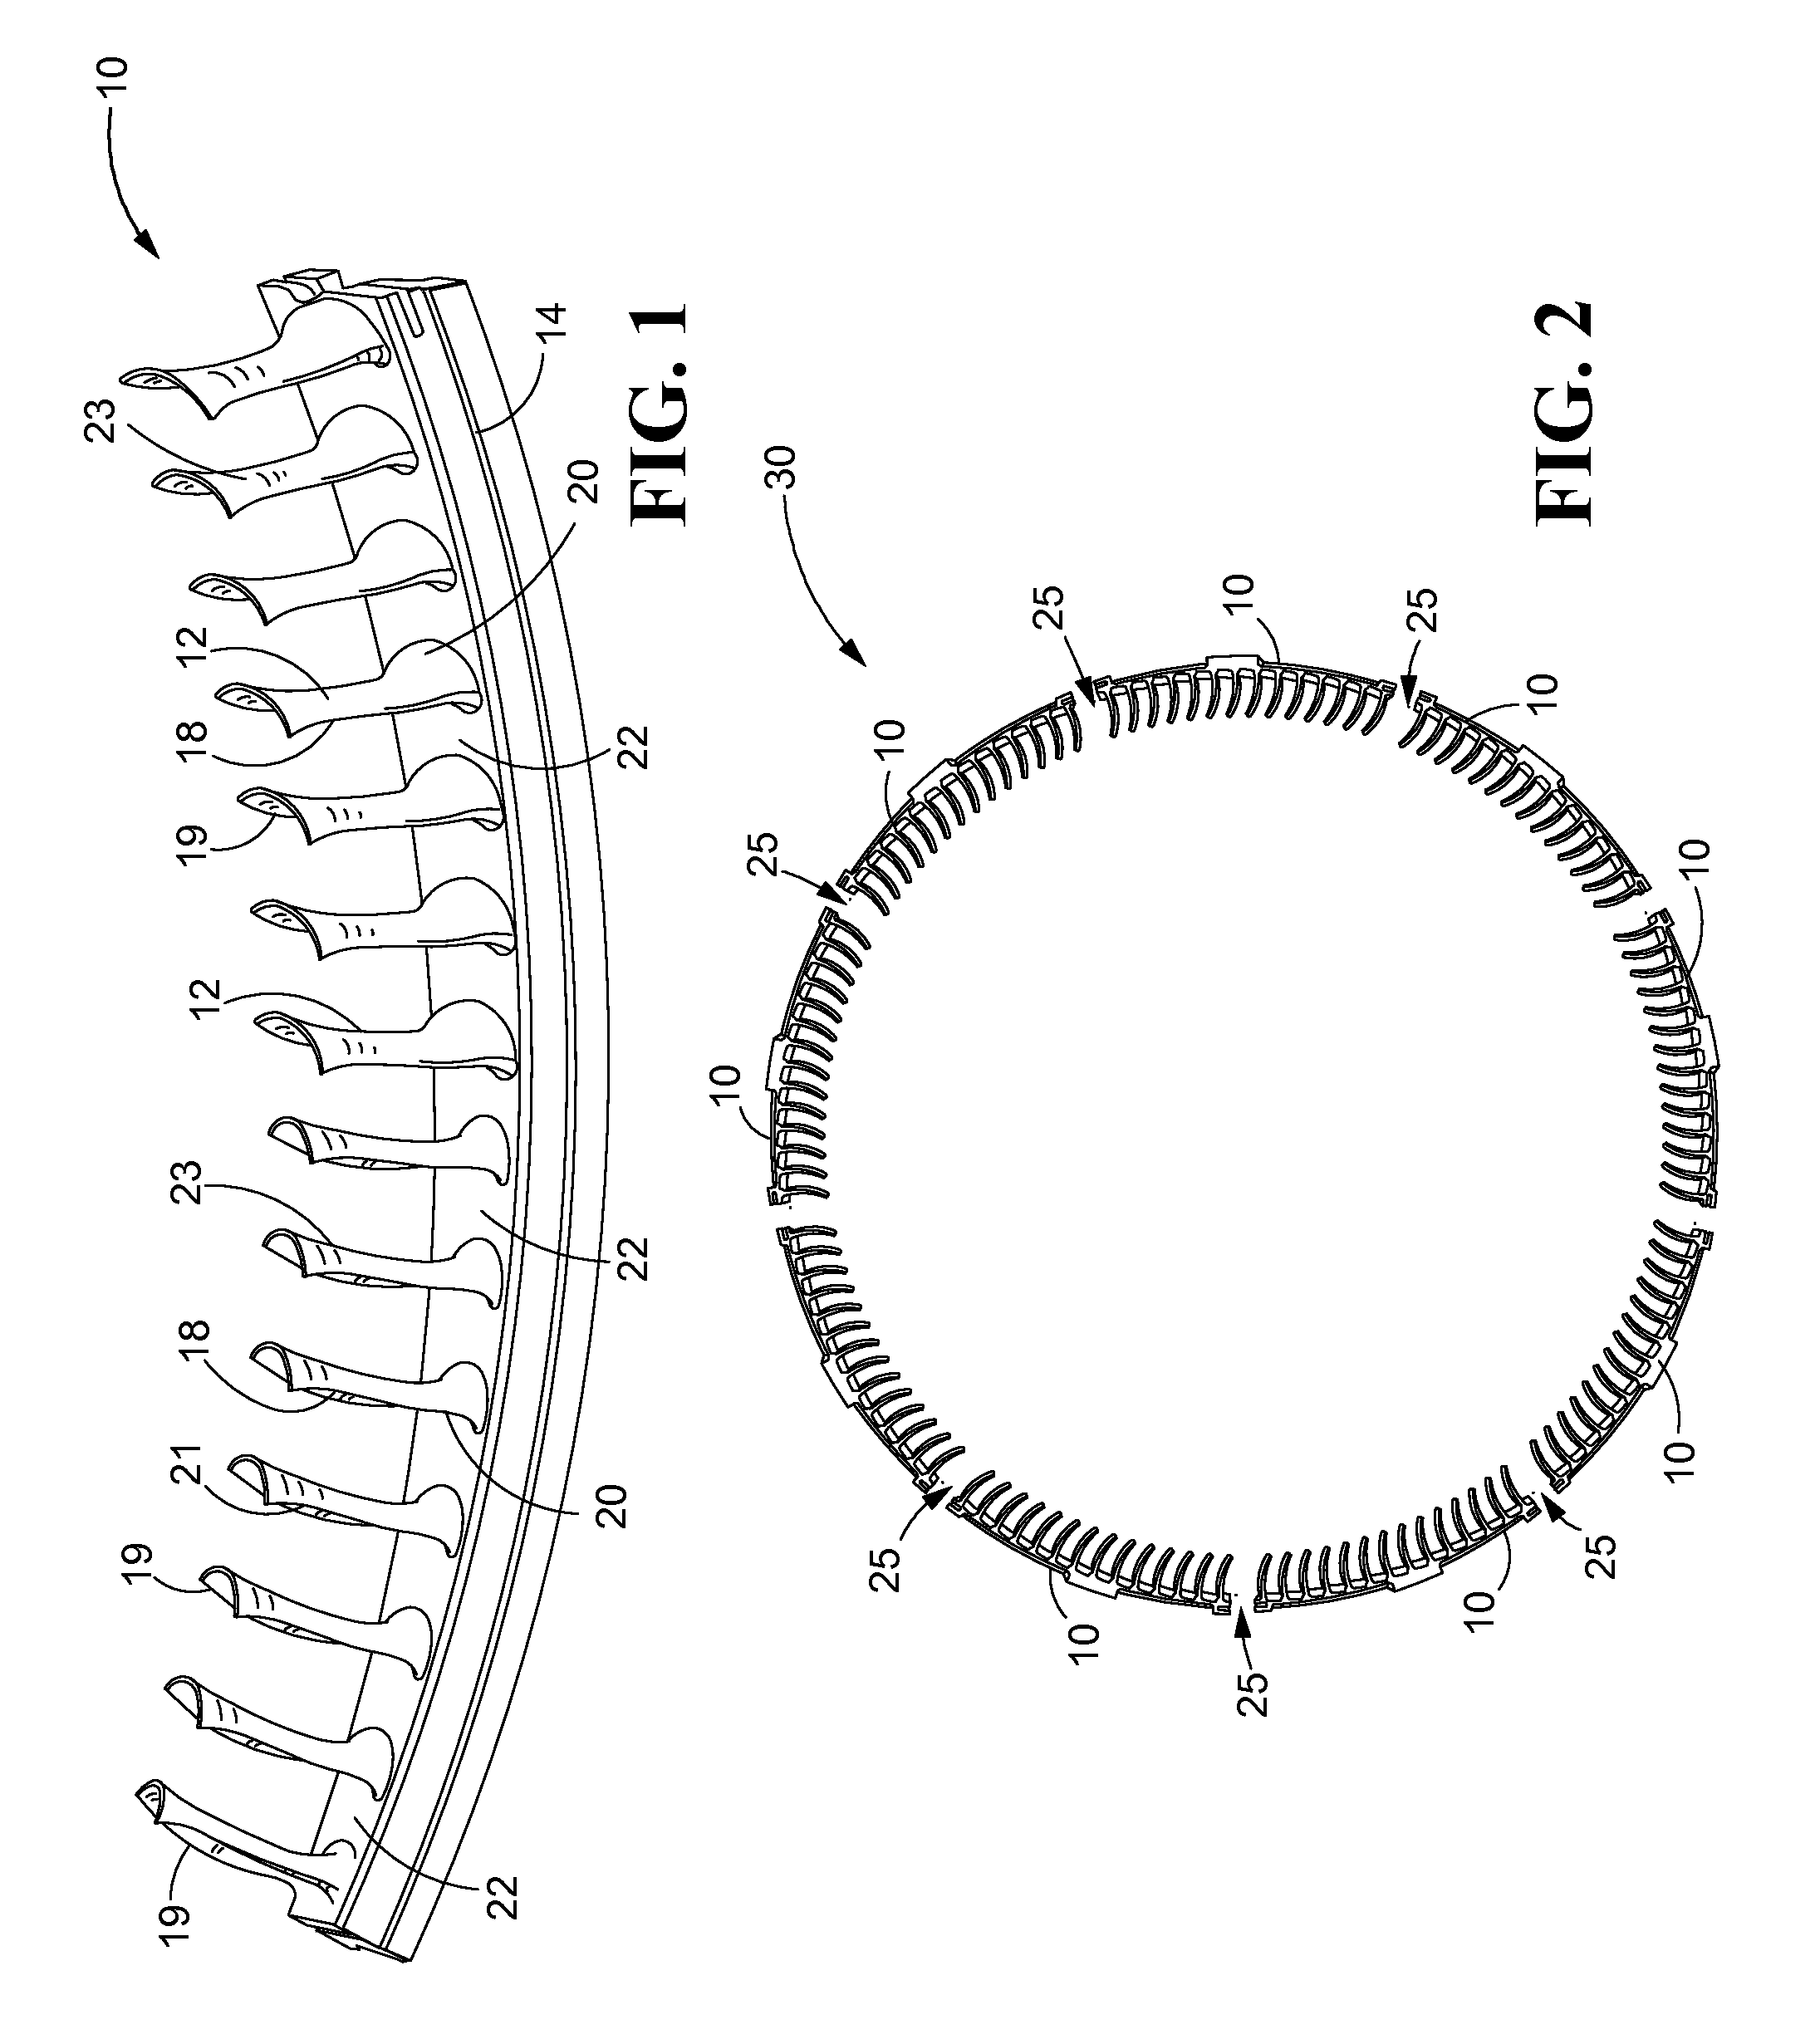 Tool for abrasive flow machining of airfoil clusters